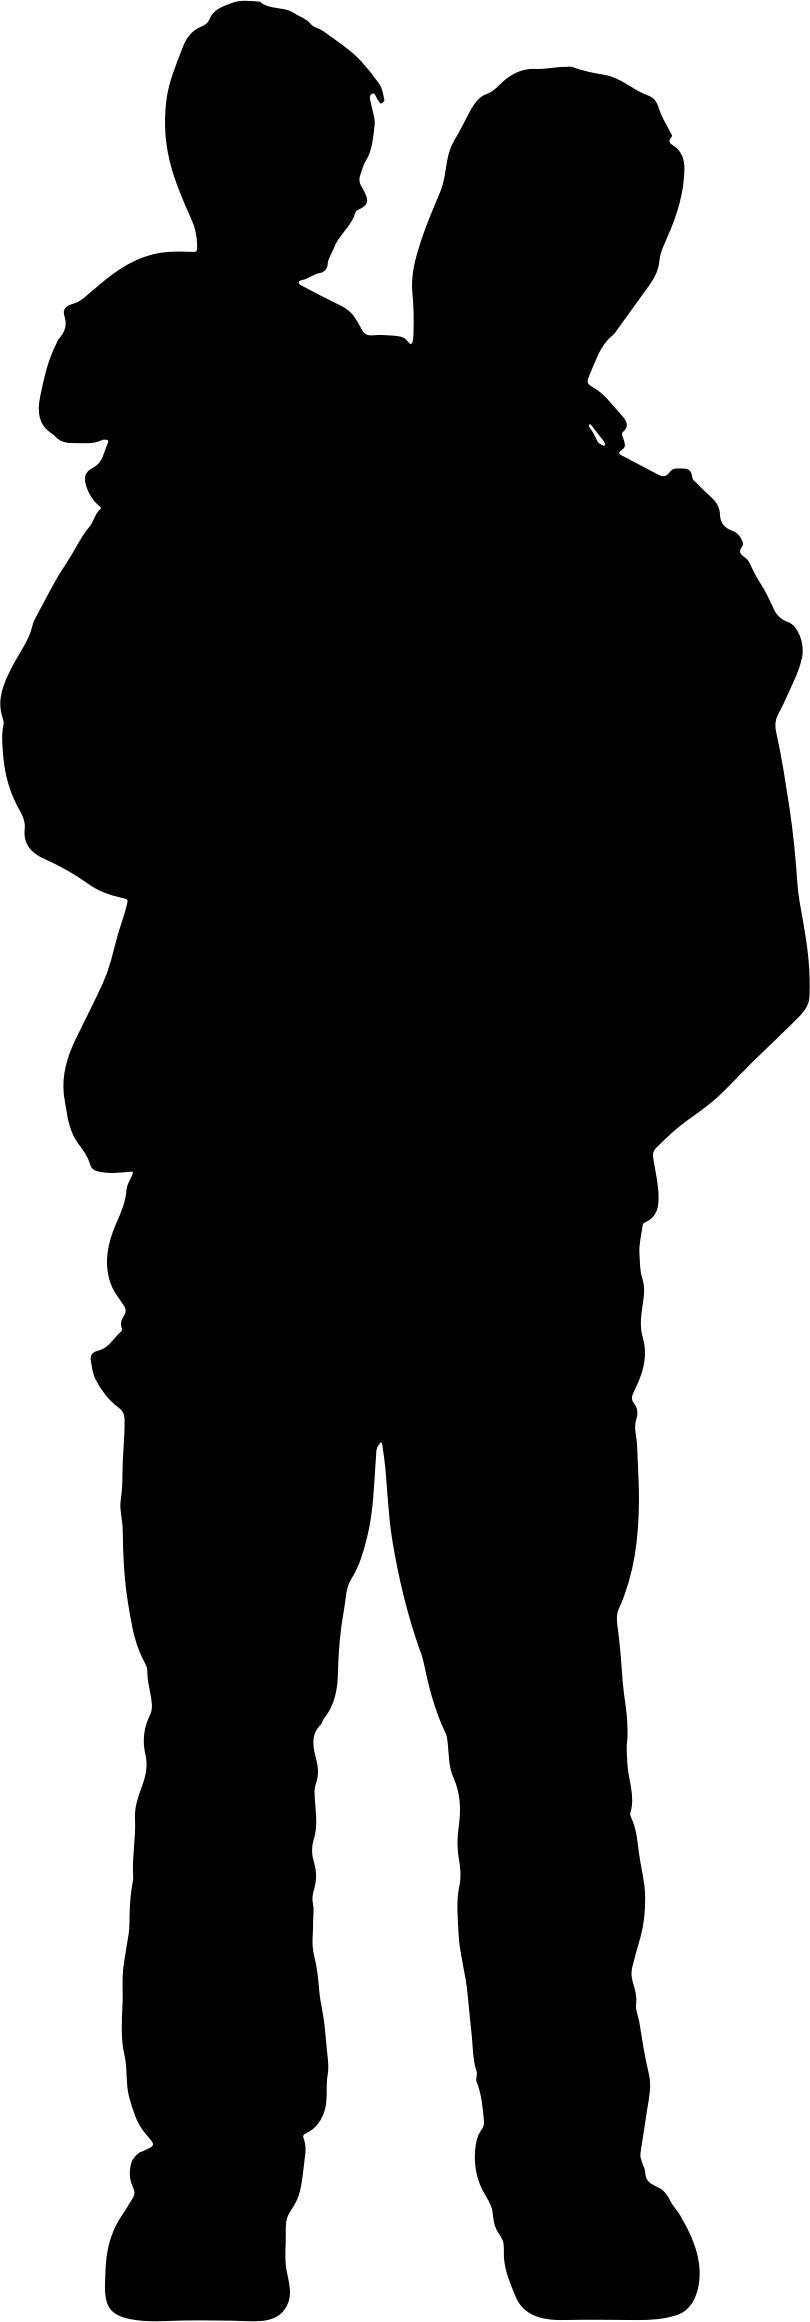 Father Holding Son Silhouette png transparent